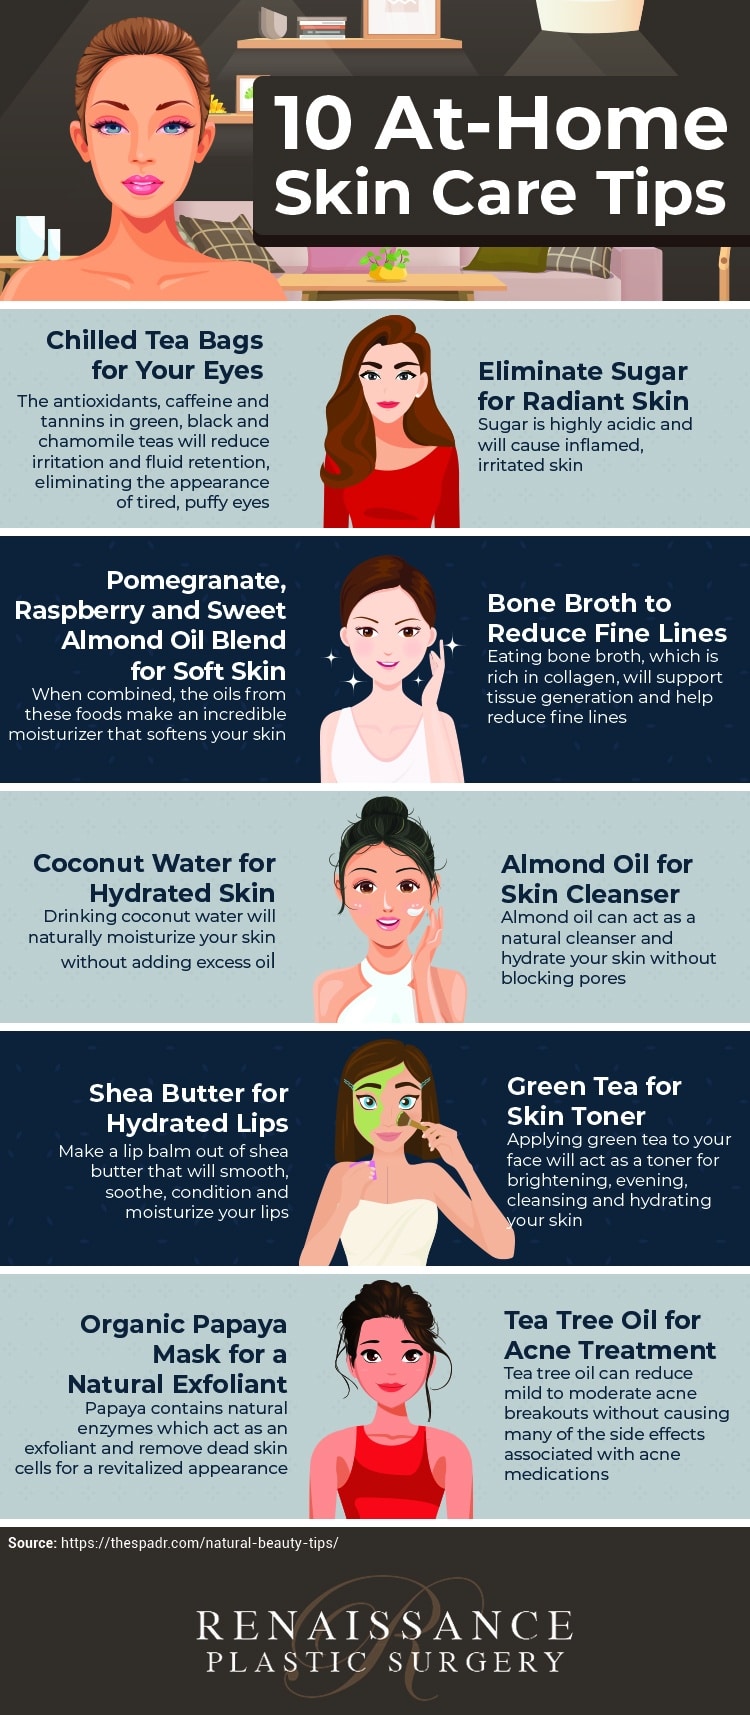 infographic highlighting 10 at-home skin care tips